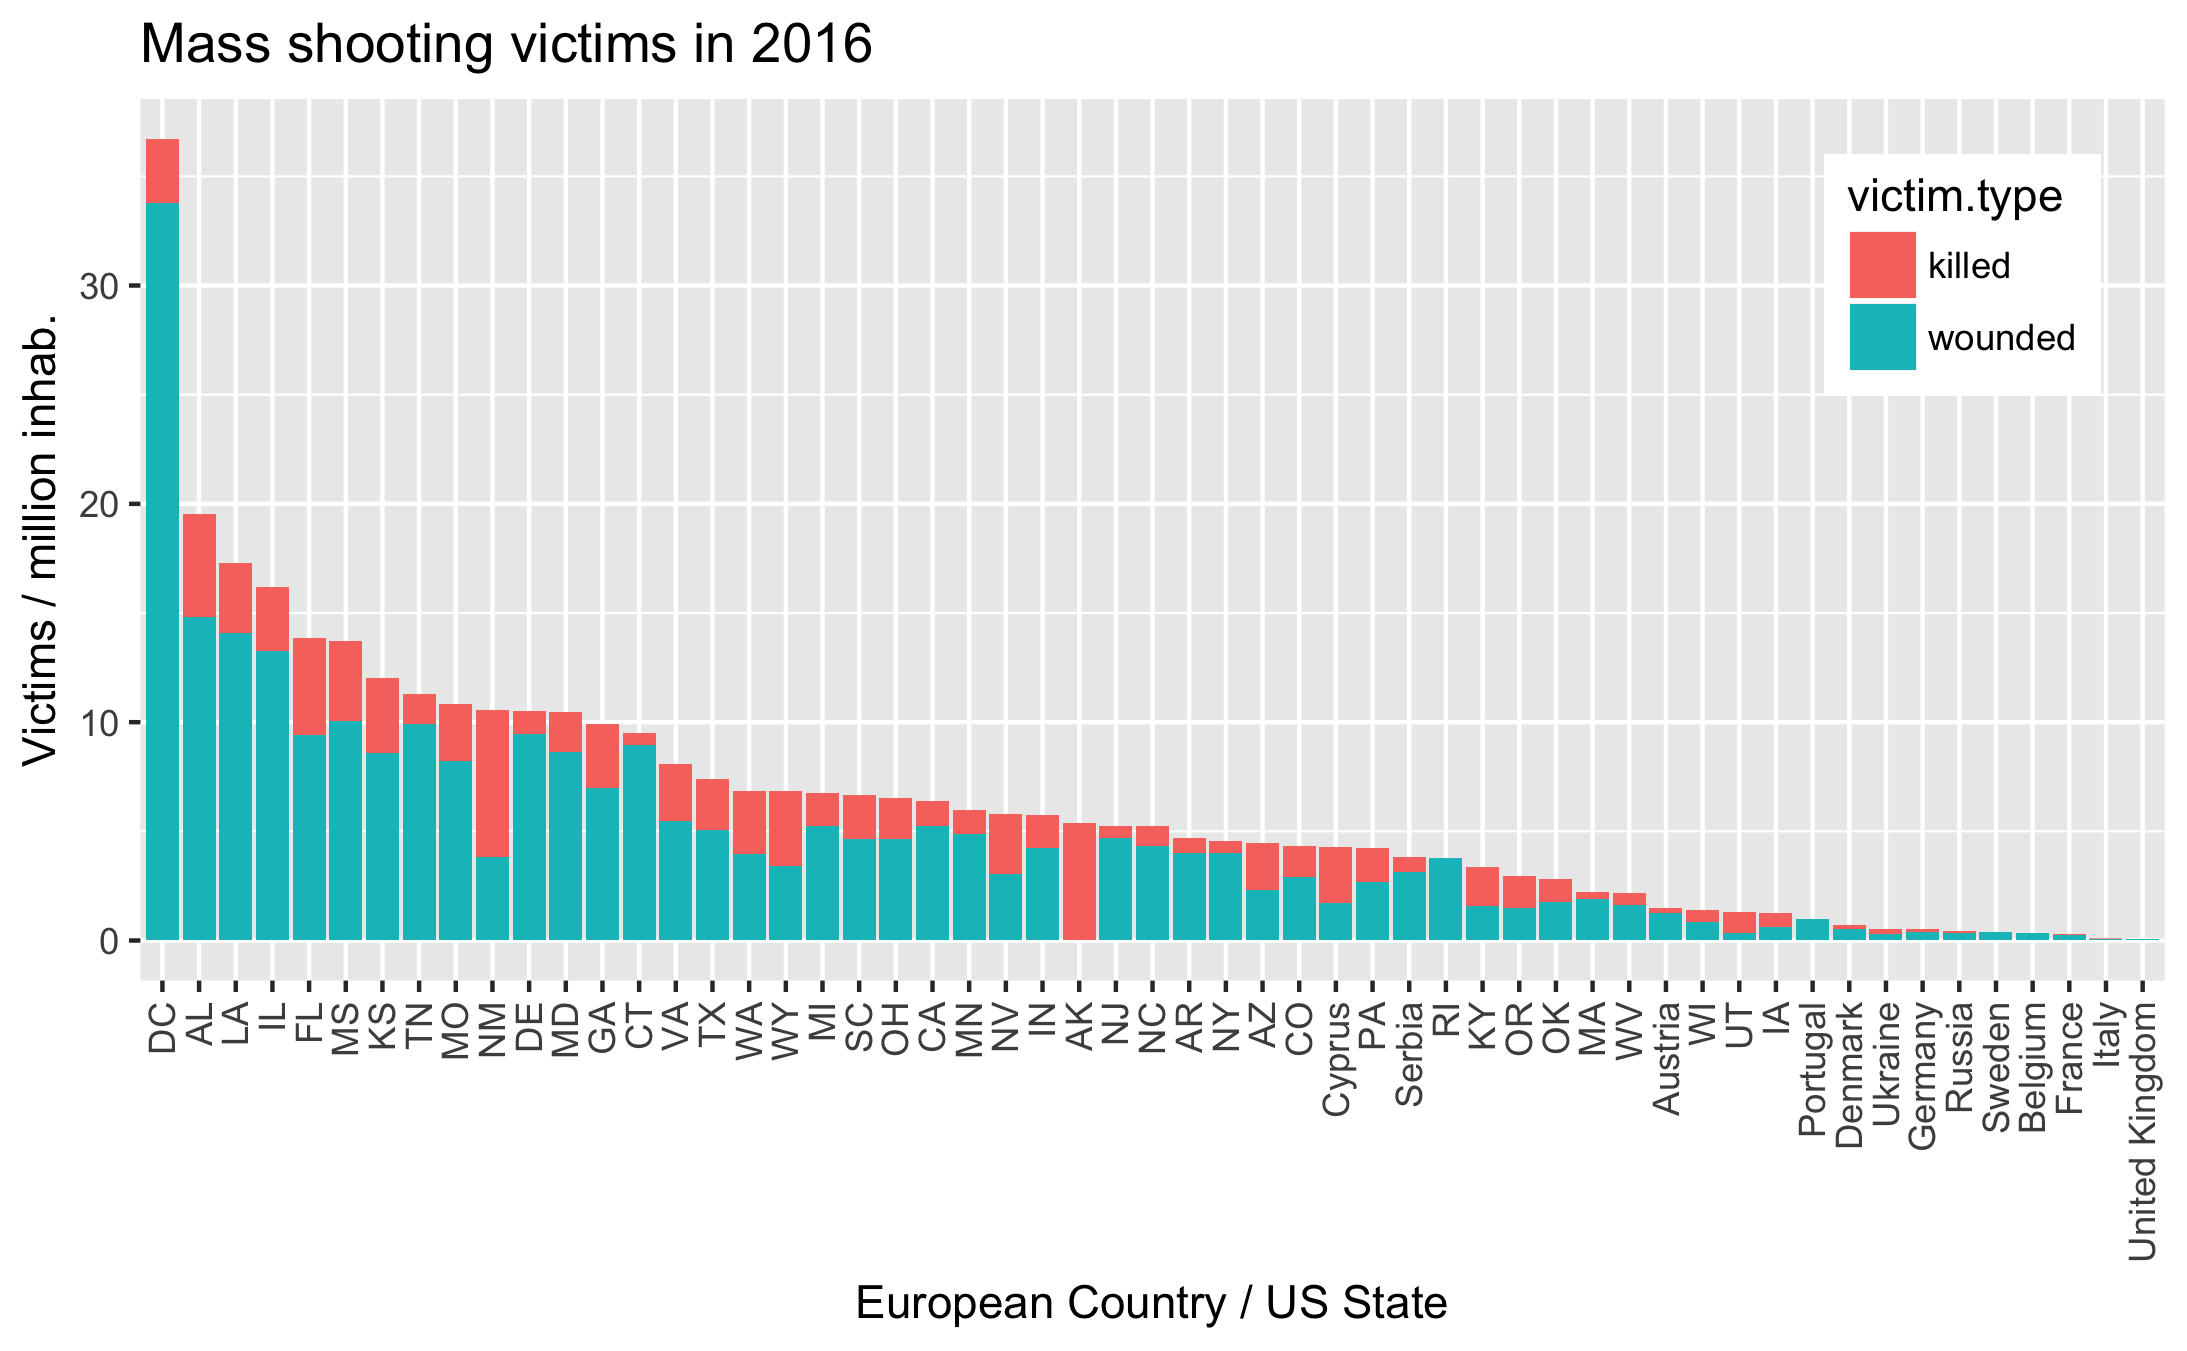 Total shooting victims in 2016, comparing USA to Europe